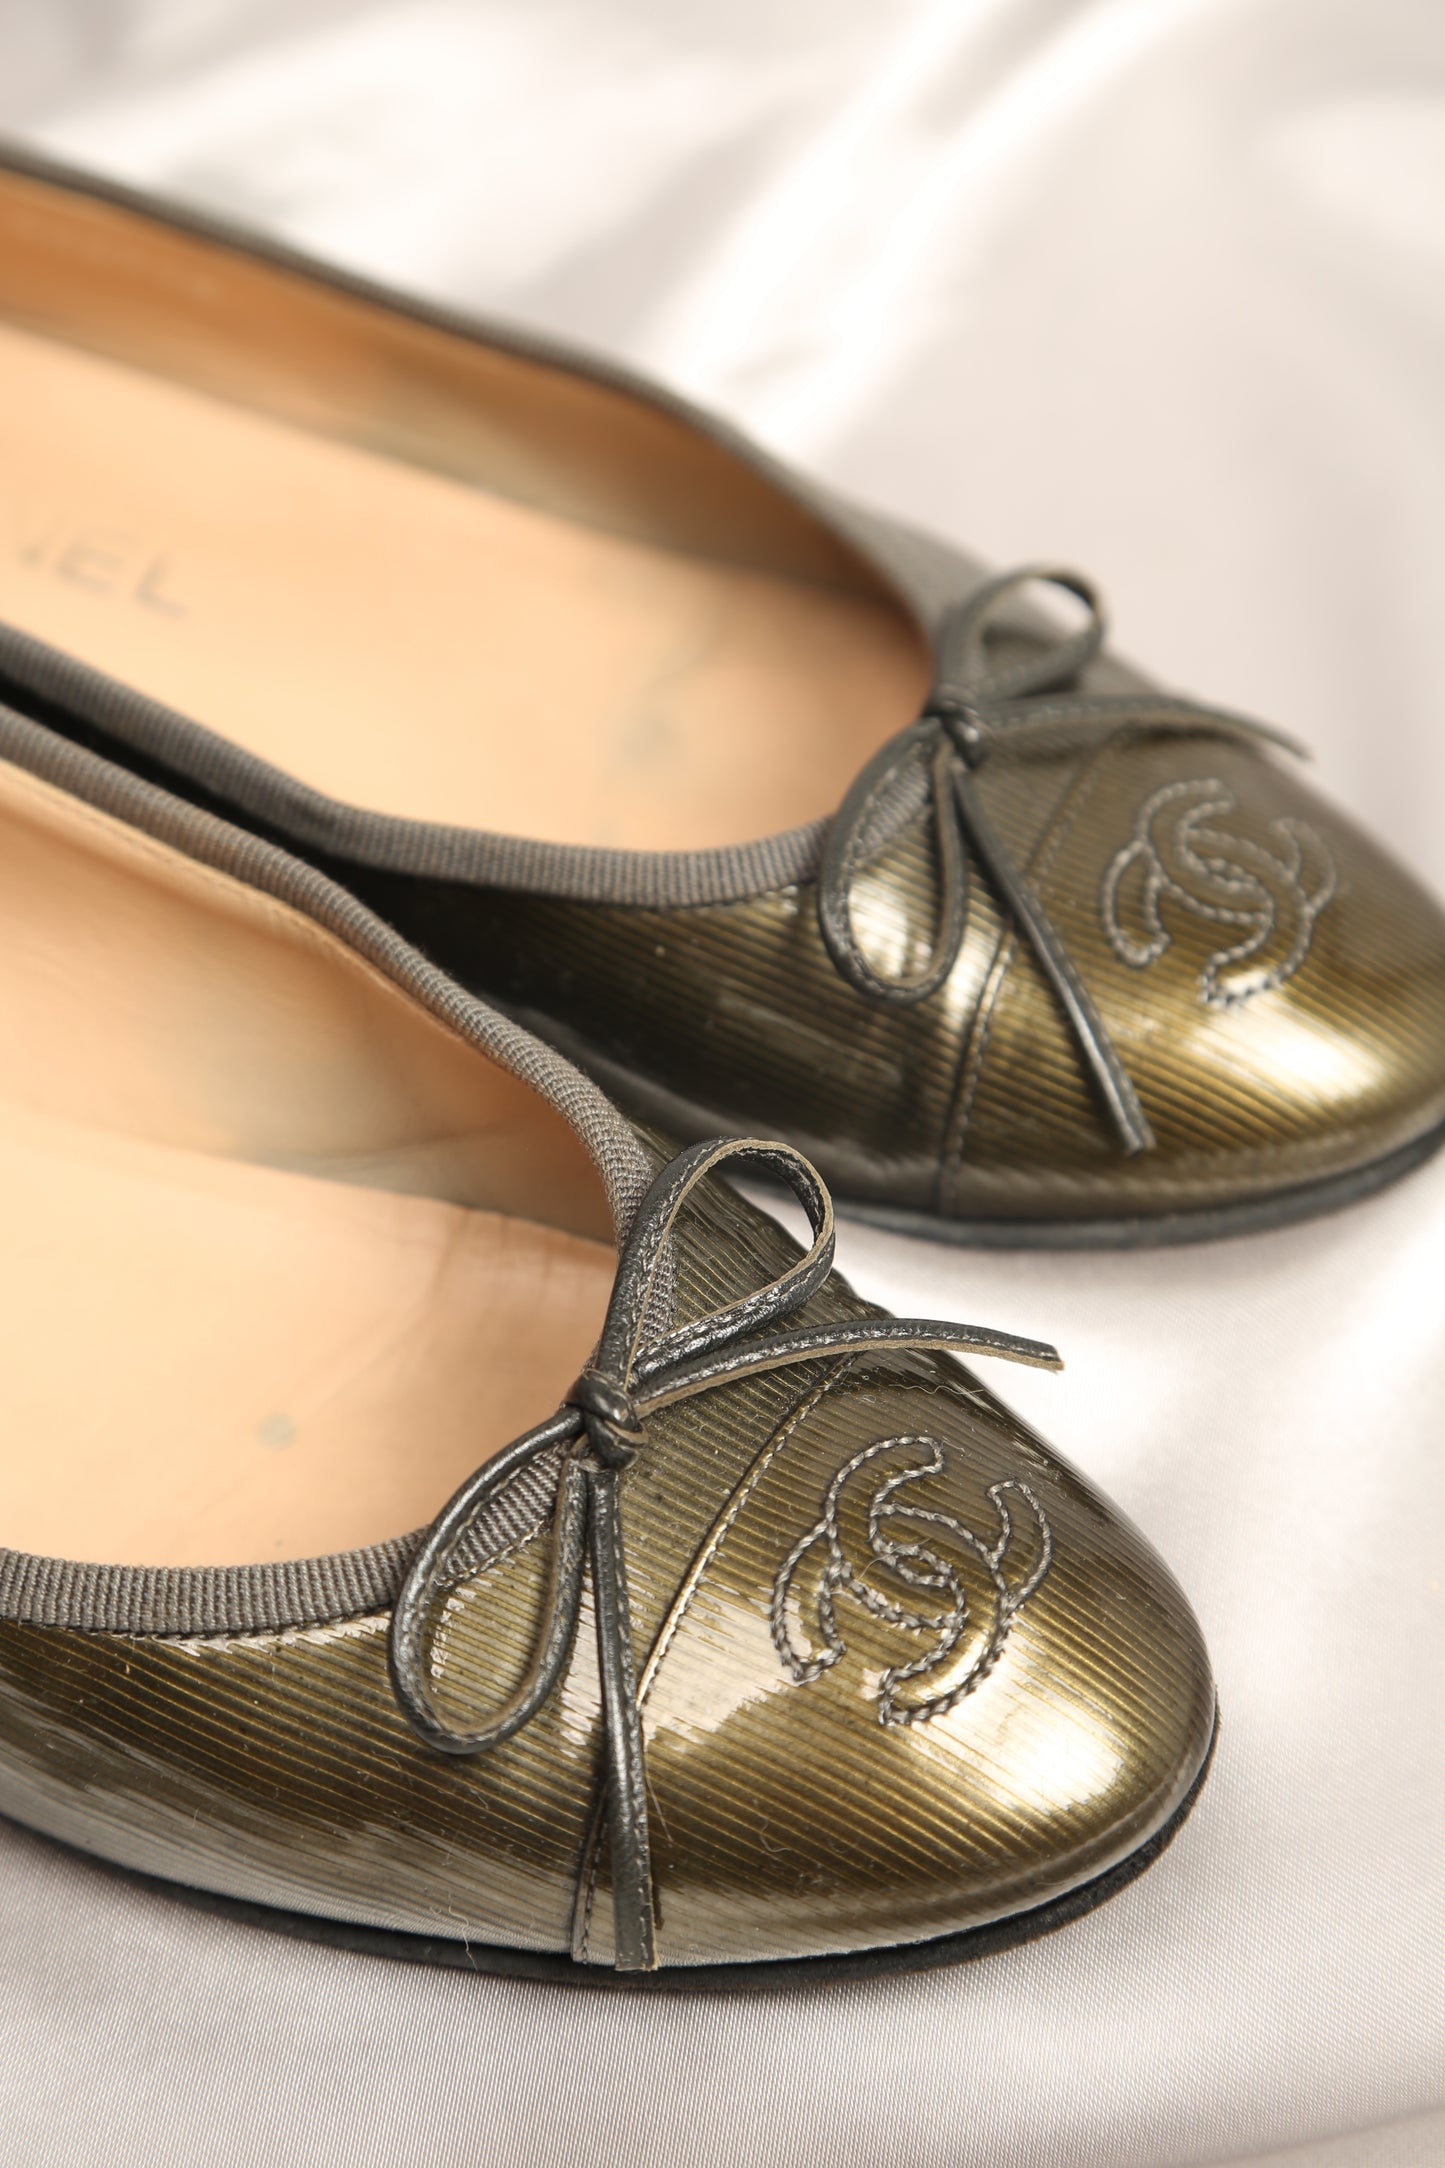 Extremely Rare CHANEL Ballet Flats